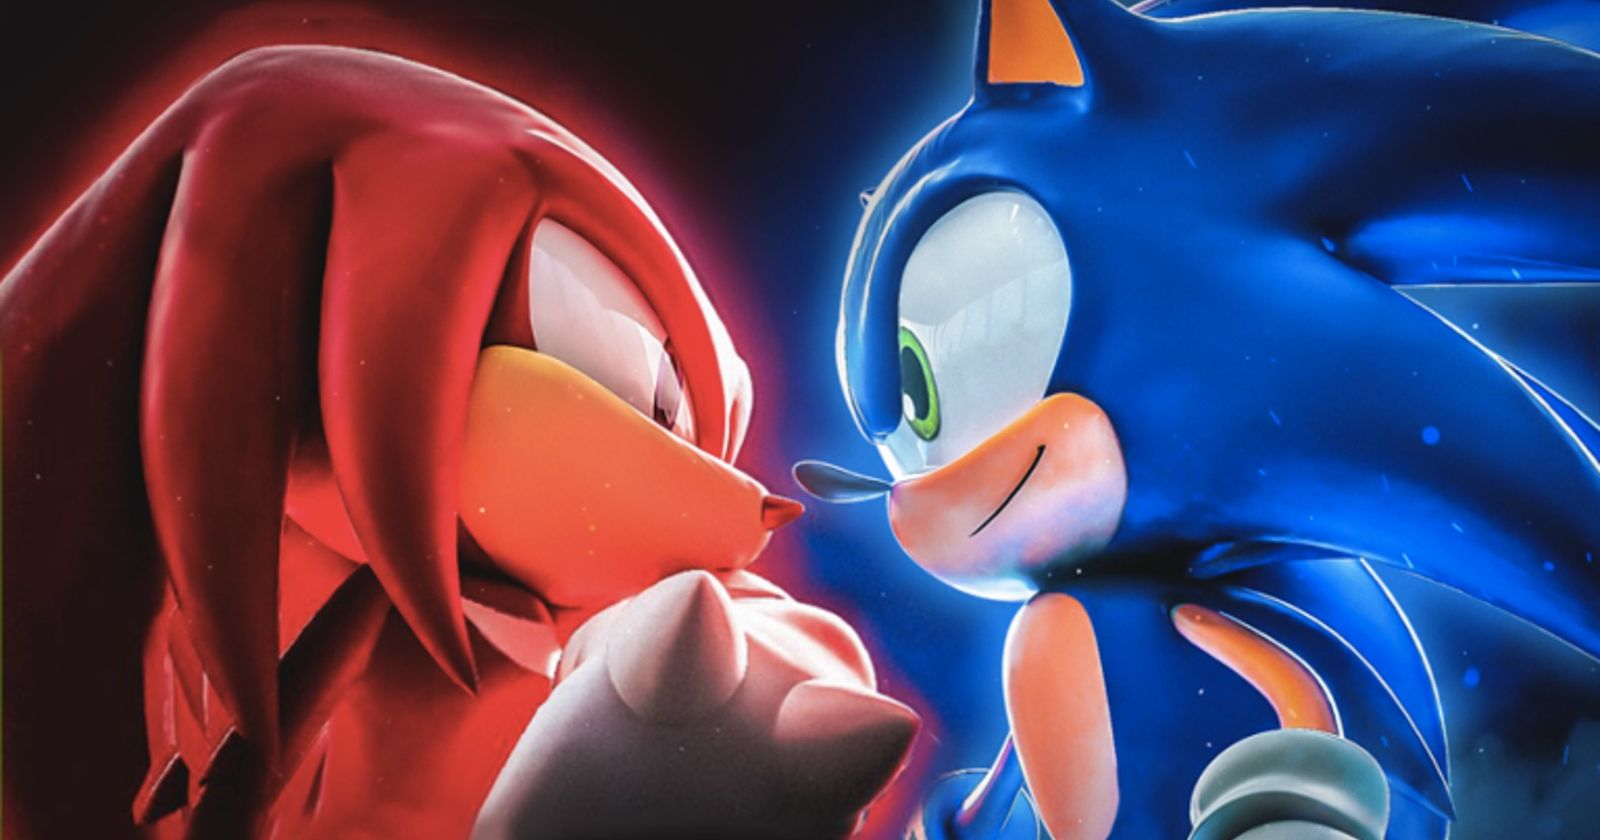 SHADOW! in Sonic Speed Simulator New Codes in Update